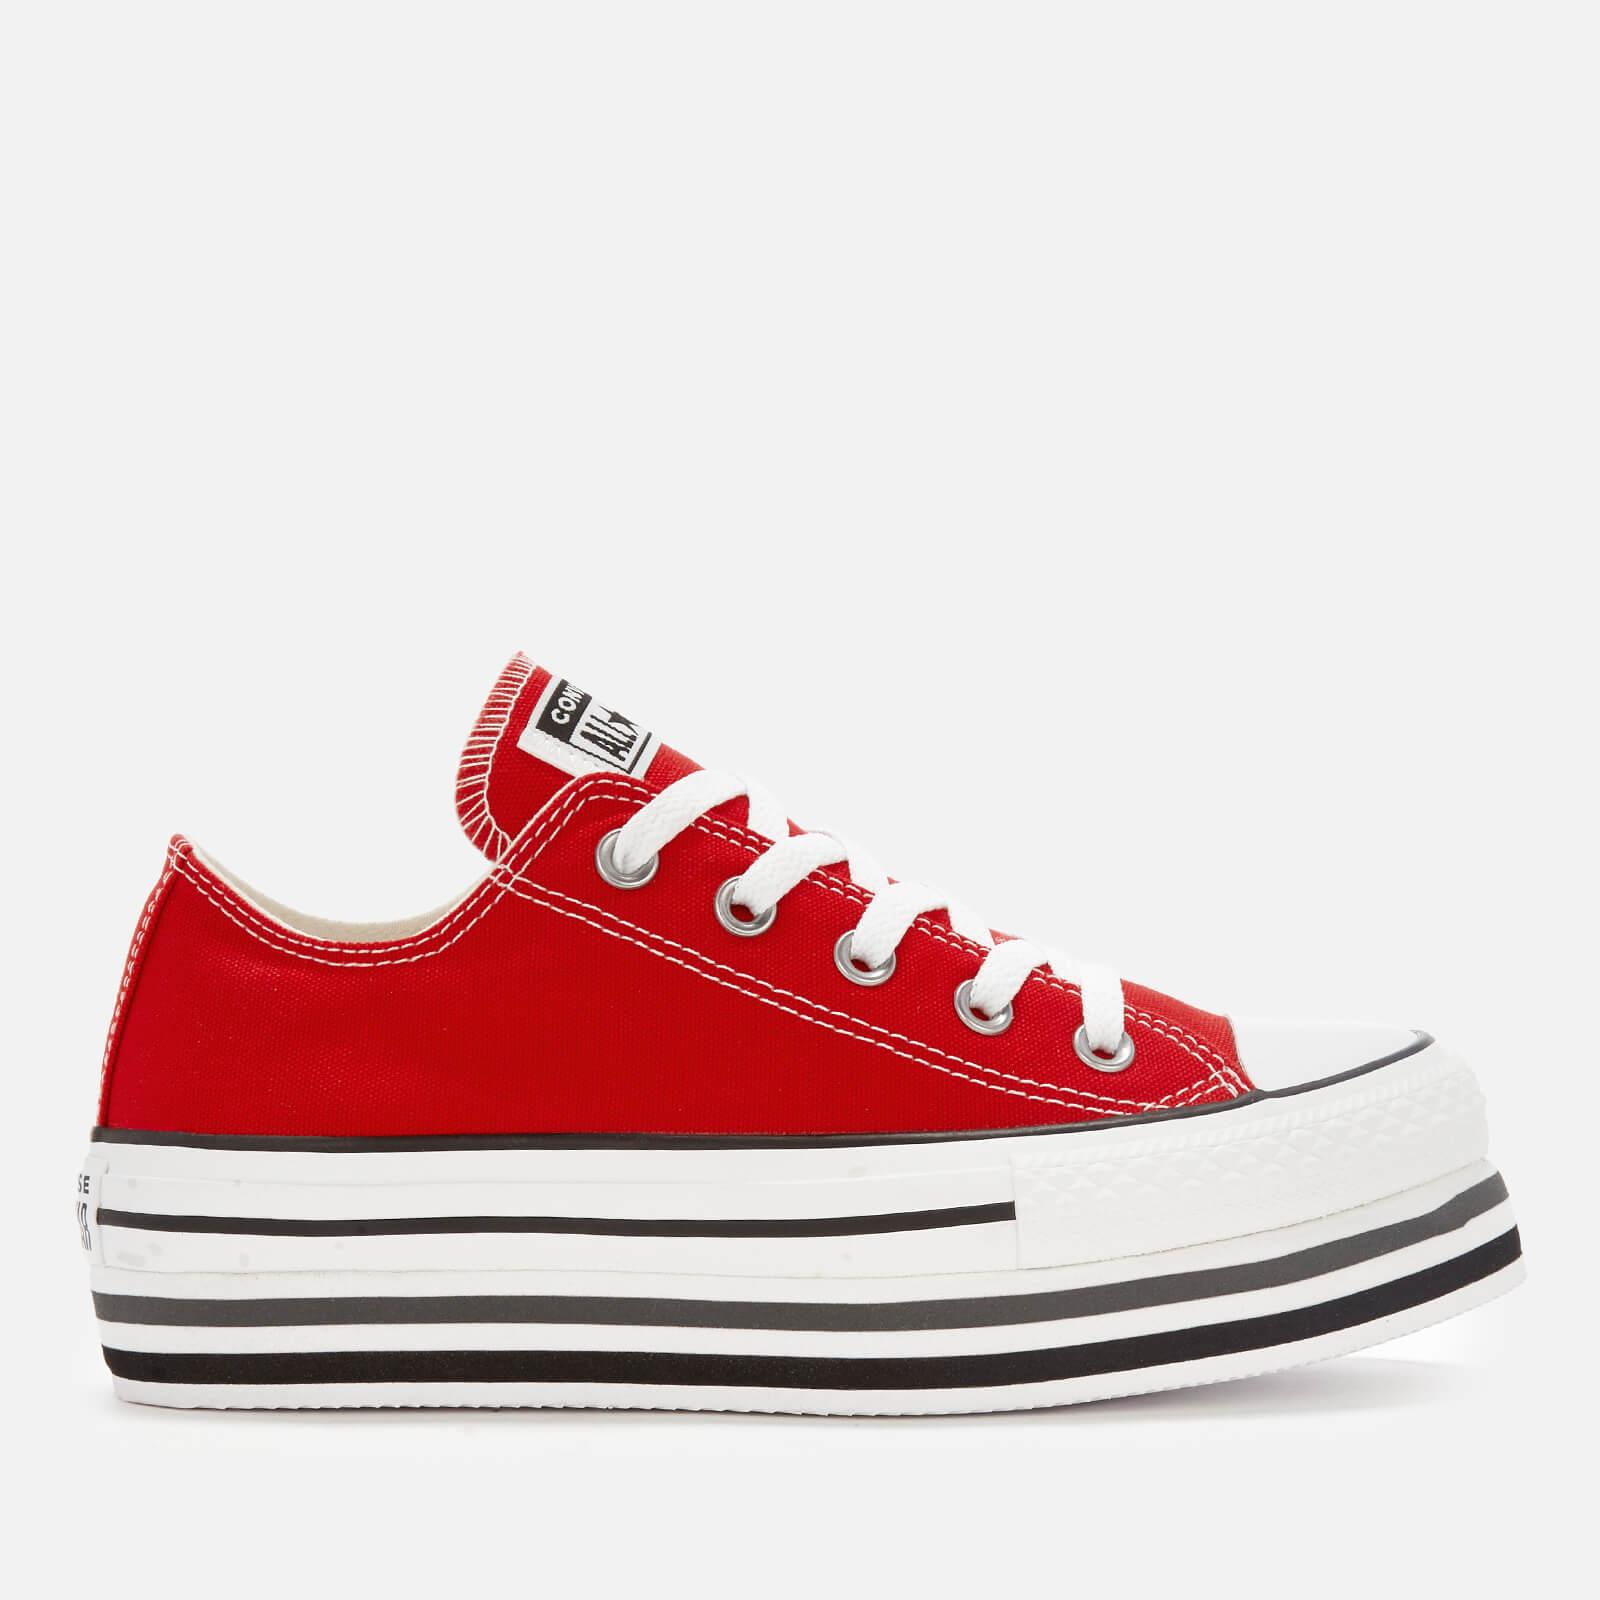 Lyst - Converse All Star Platform Layer Ox Trainers in Red